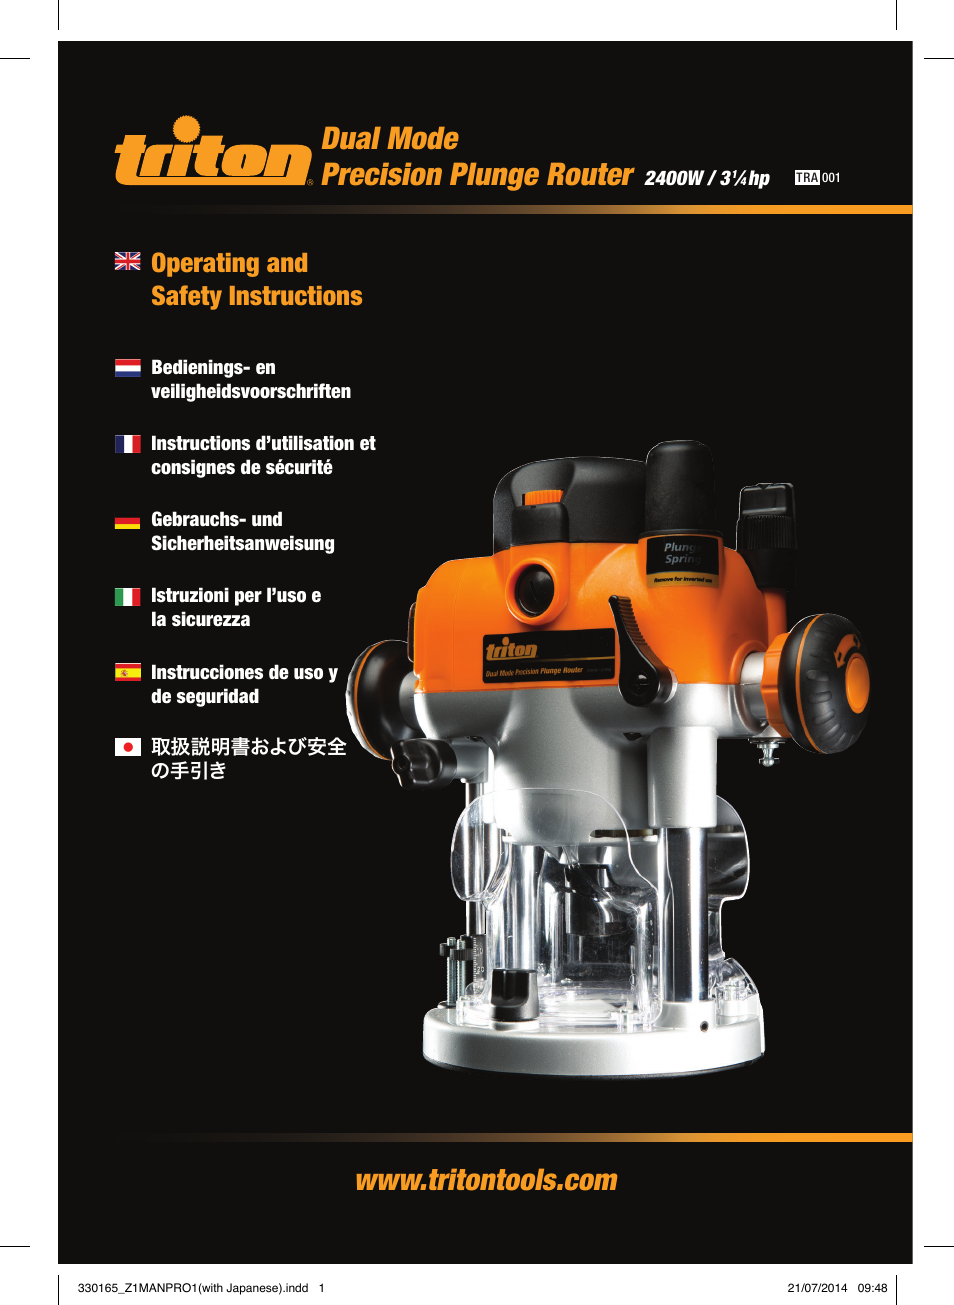 Dual mode precision plunge router, Operating and safety instructions | Triton  TRA 001 User Manual | Page 2 / 72 | Original mode